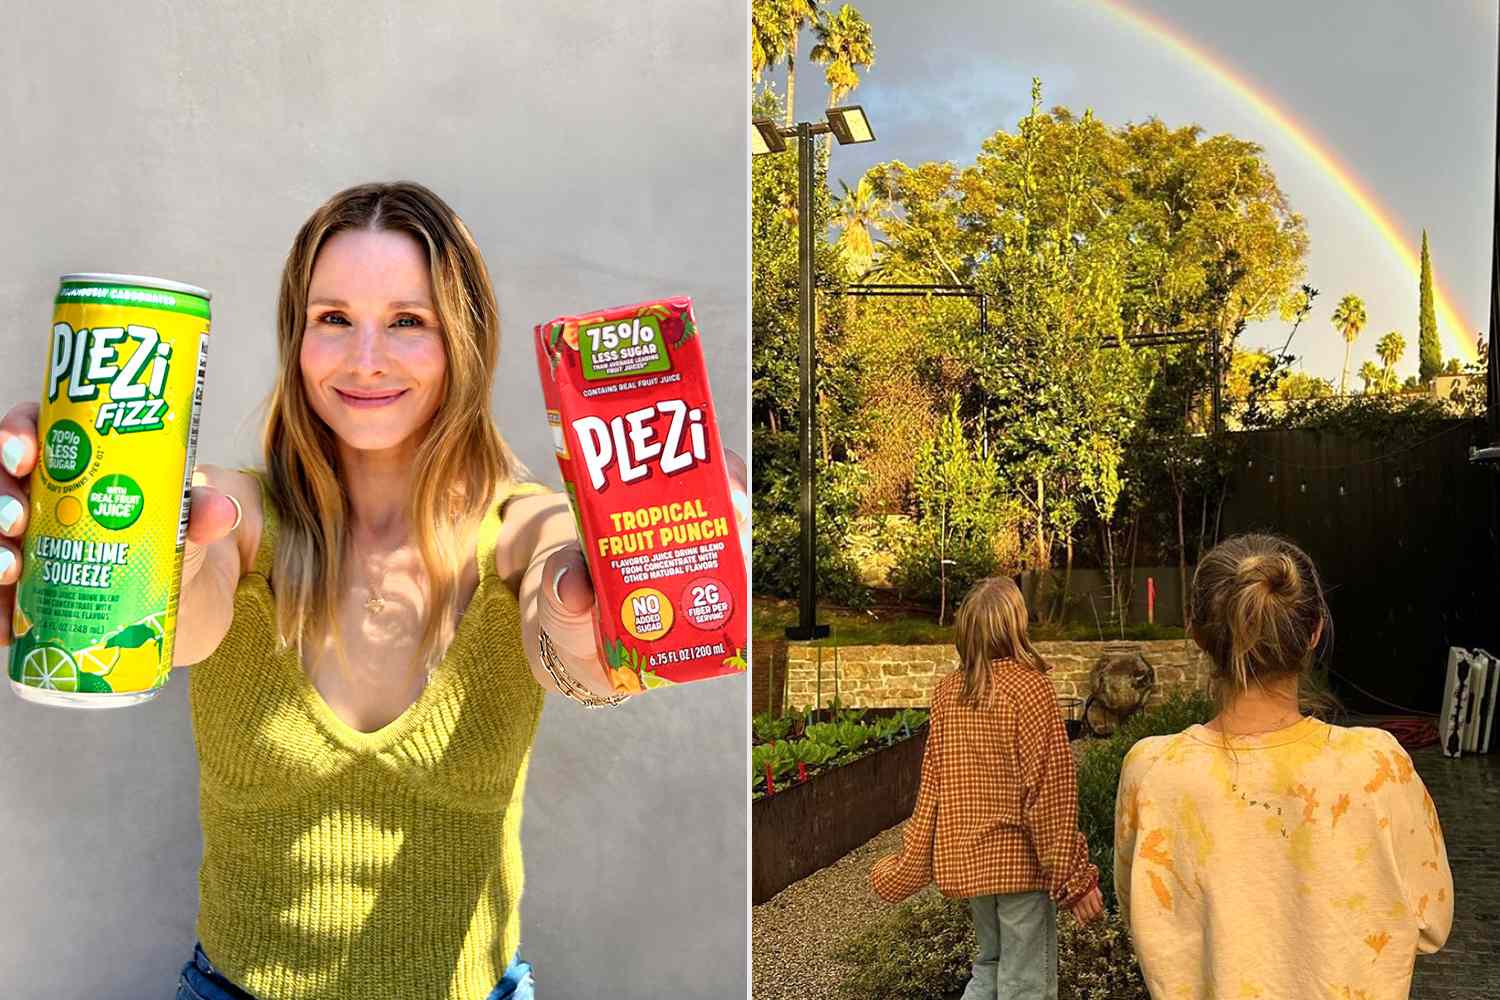 Kristen Bell Reveals Item in Kids' Lunch That 'Rarely Comes Back' and How They Avoid Sugary Drinks (Exclusive)